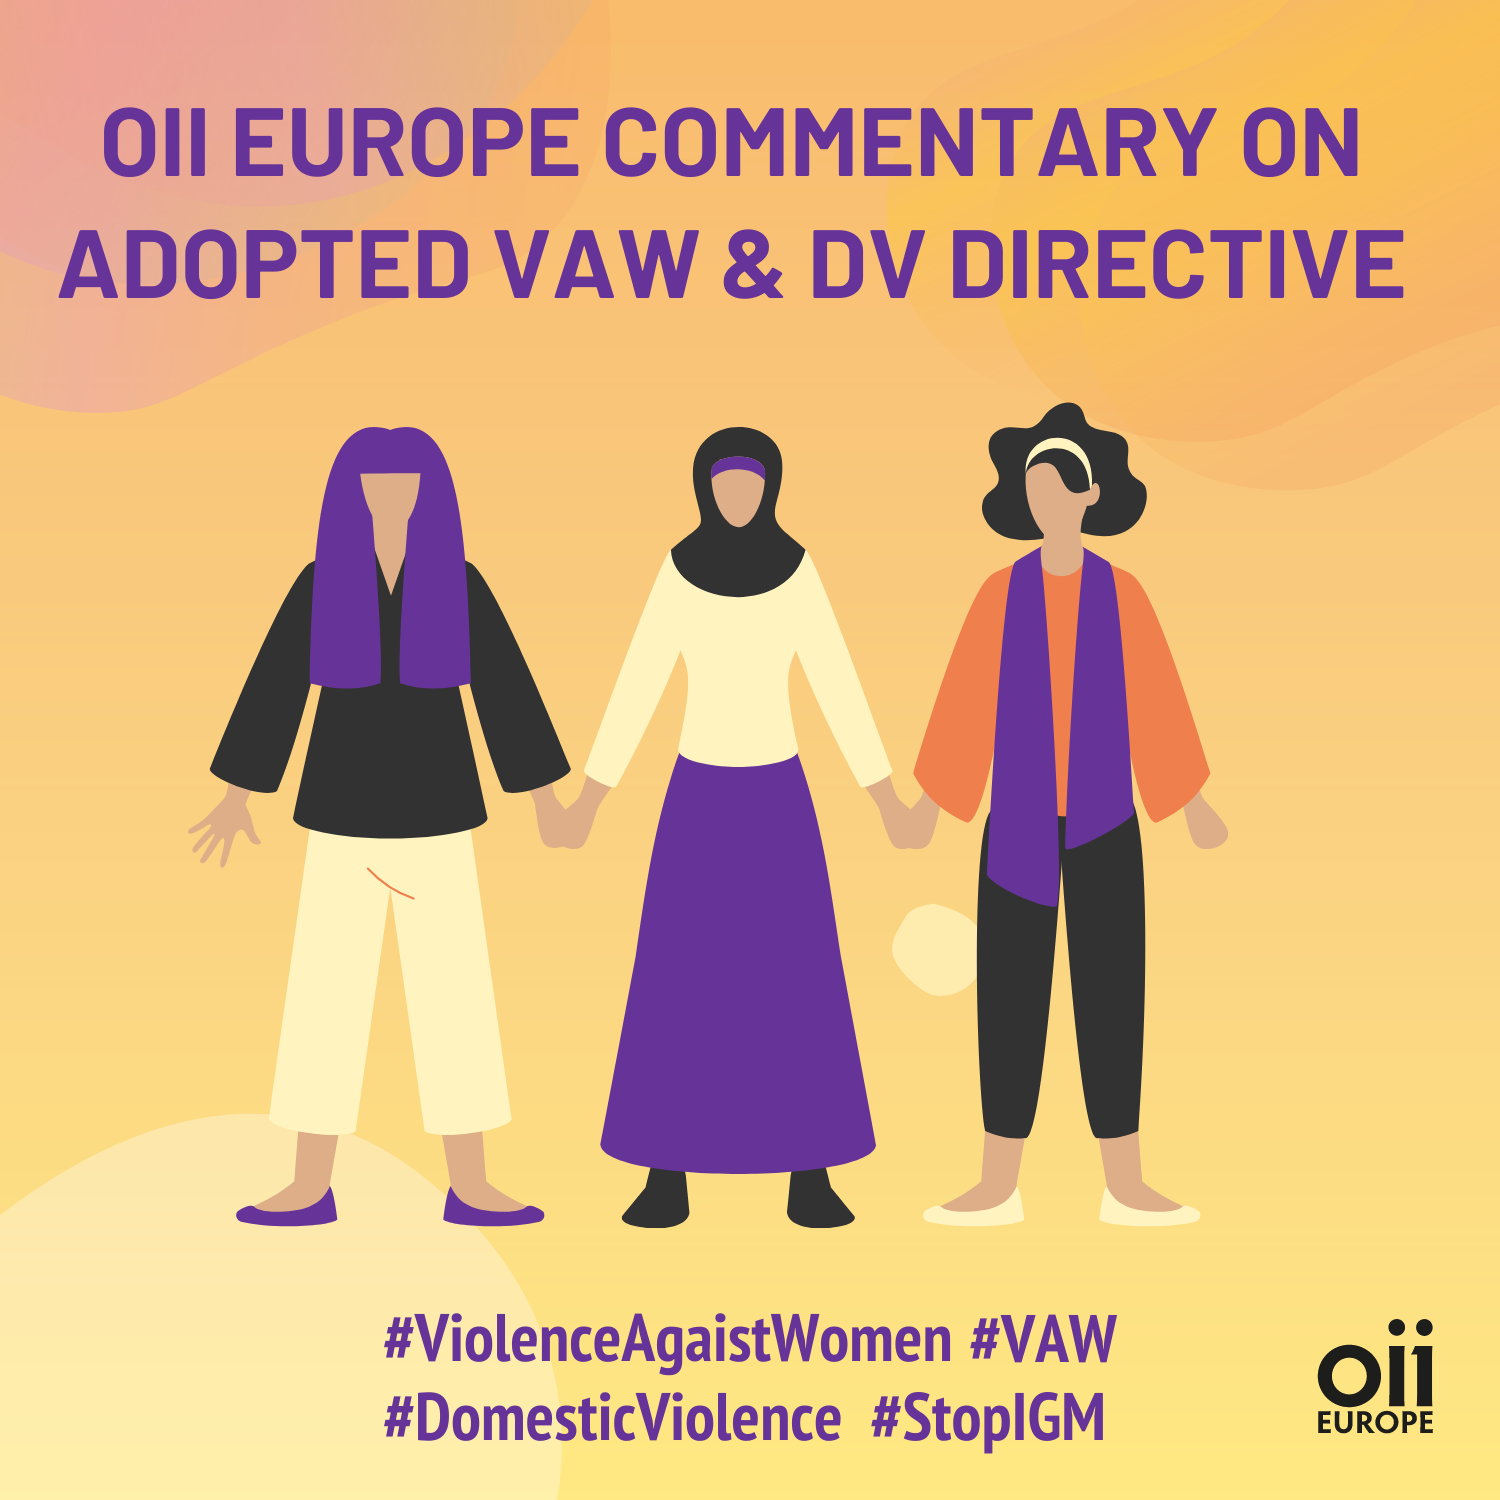 OII Europe commentary on adopted VAW & DV Directive